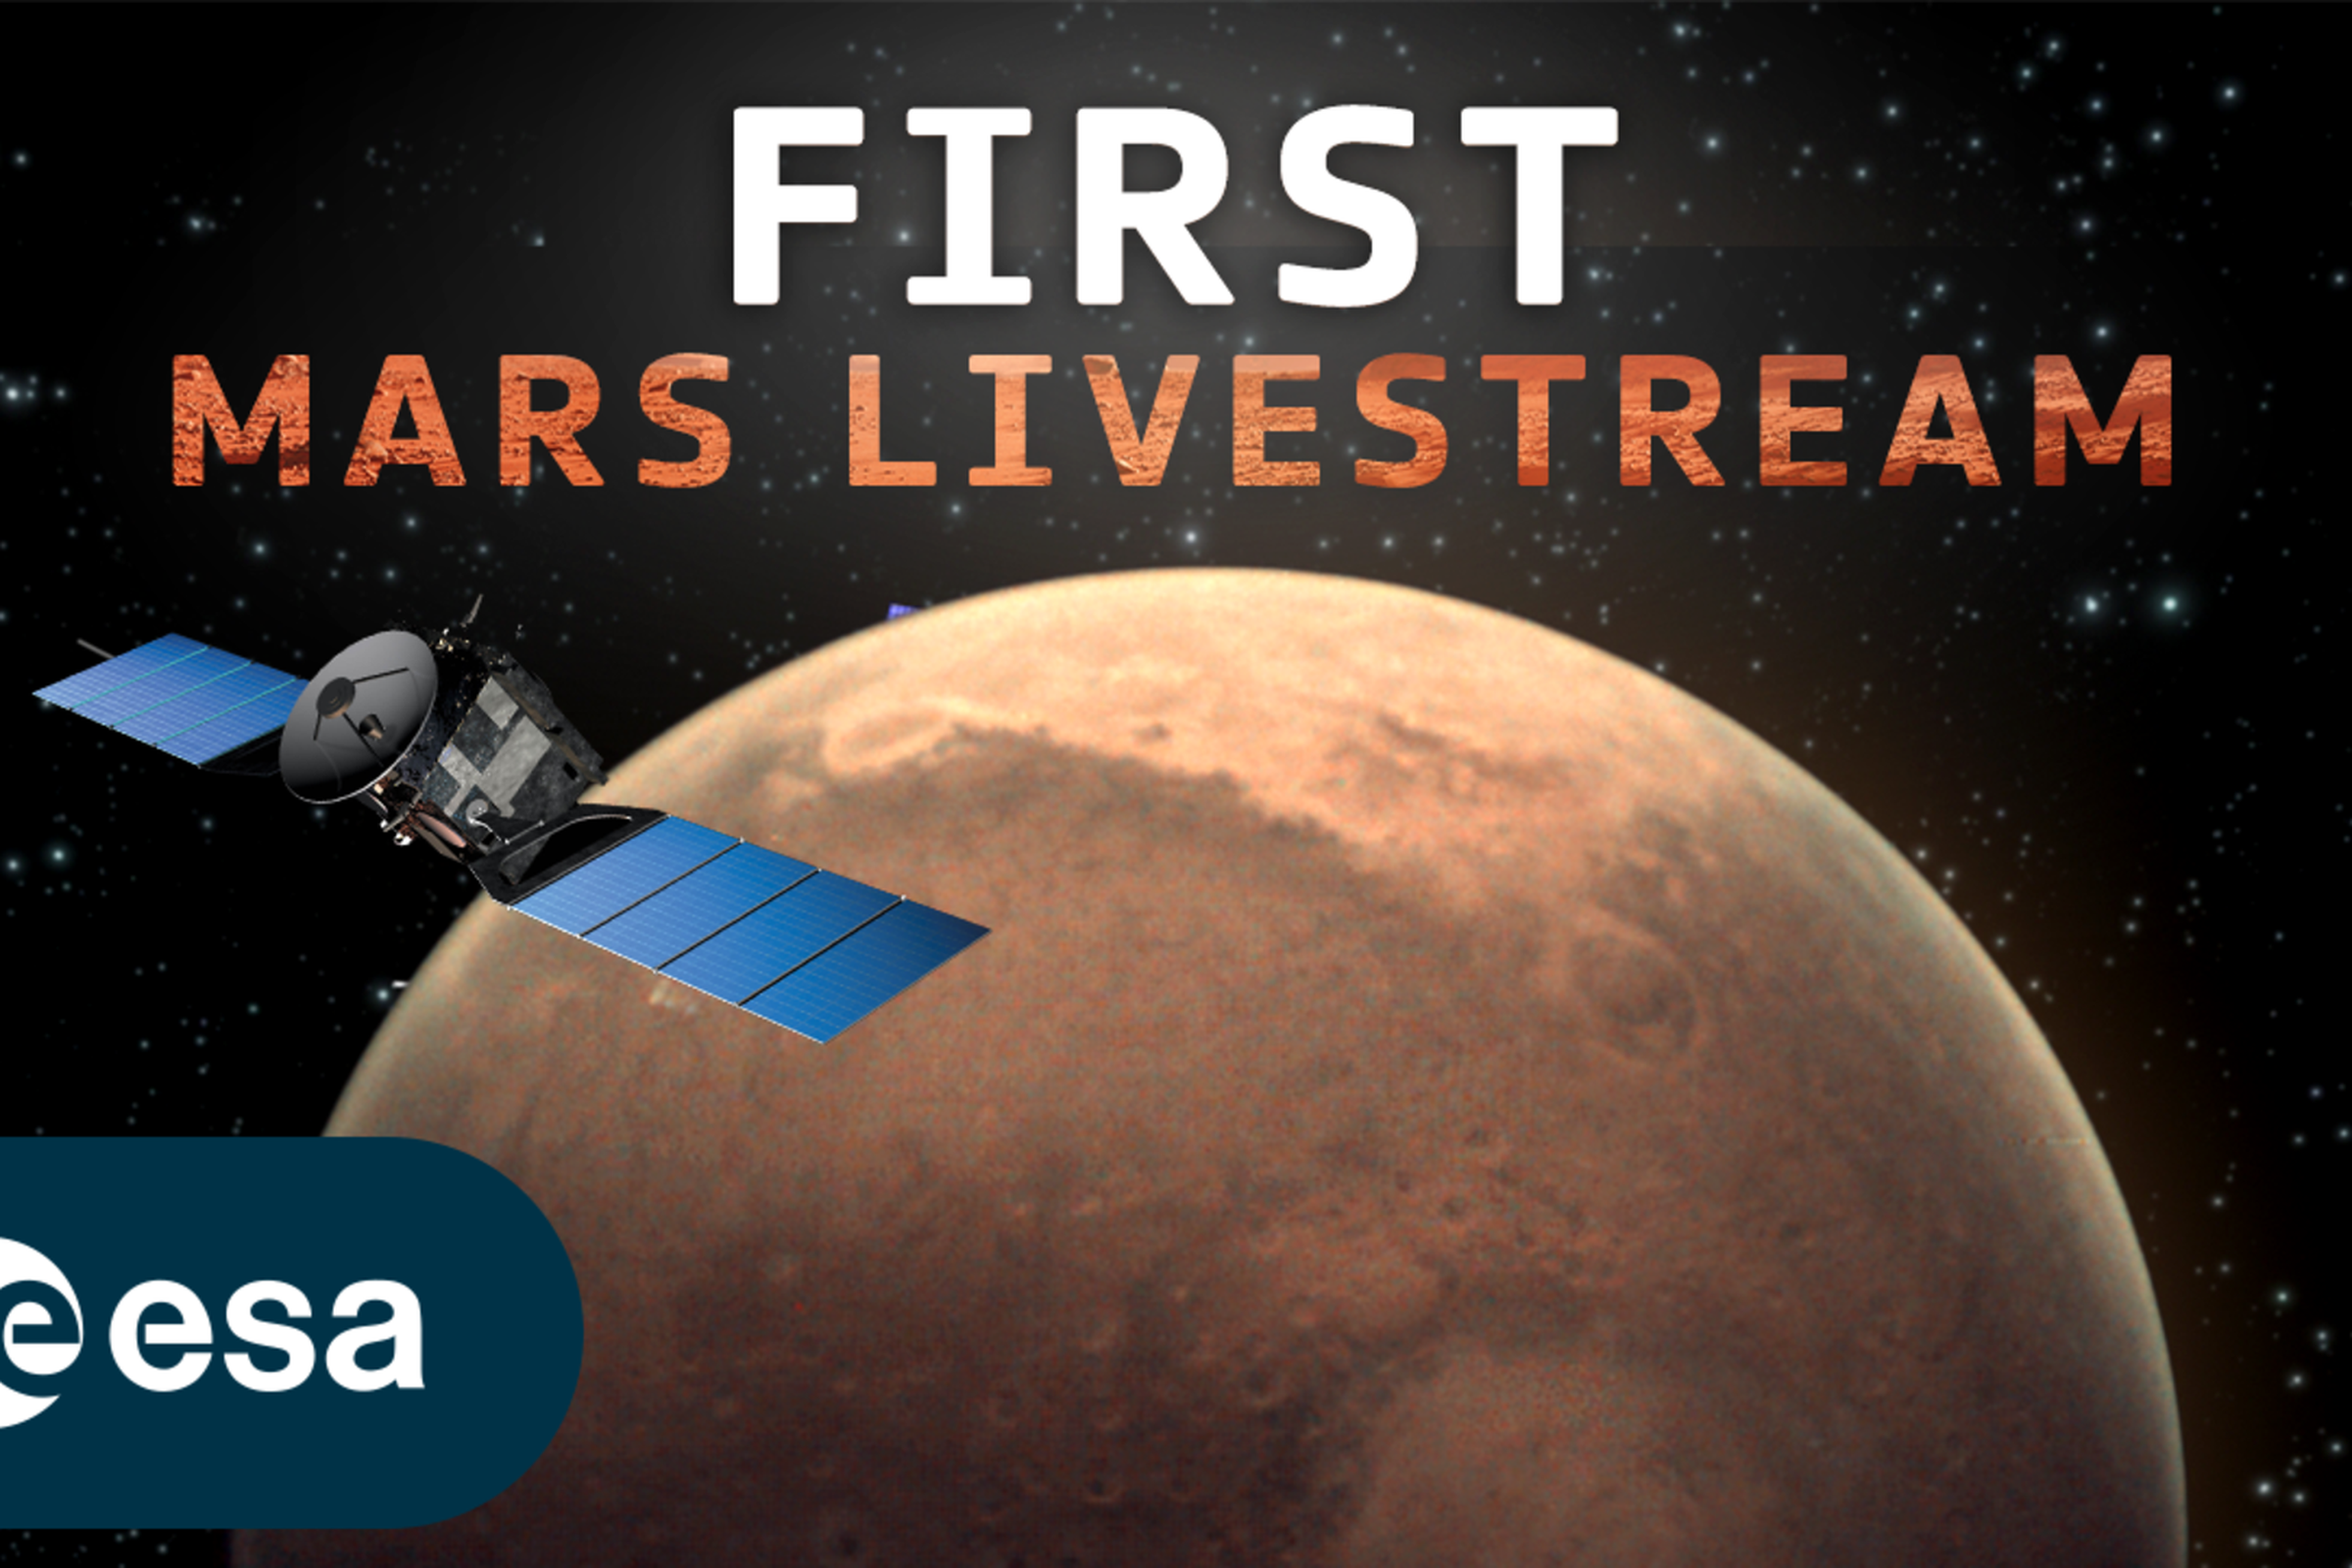 An artist’s recreation of the Mars Express against the backdrop of Mars, with the words “First Mars Livestream” at the top and the ESA logo in the bottom left corner